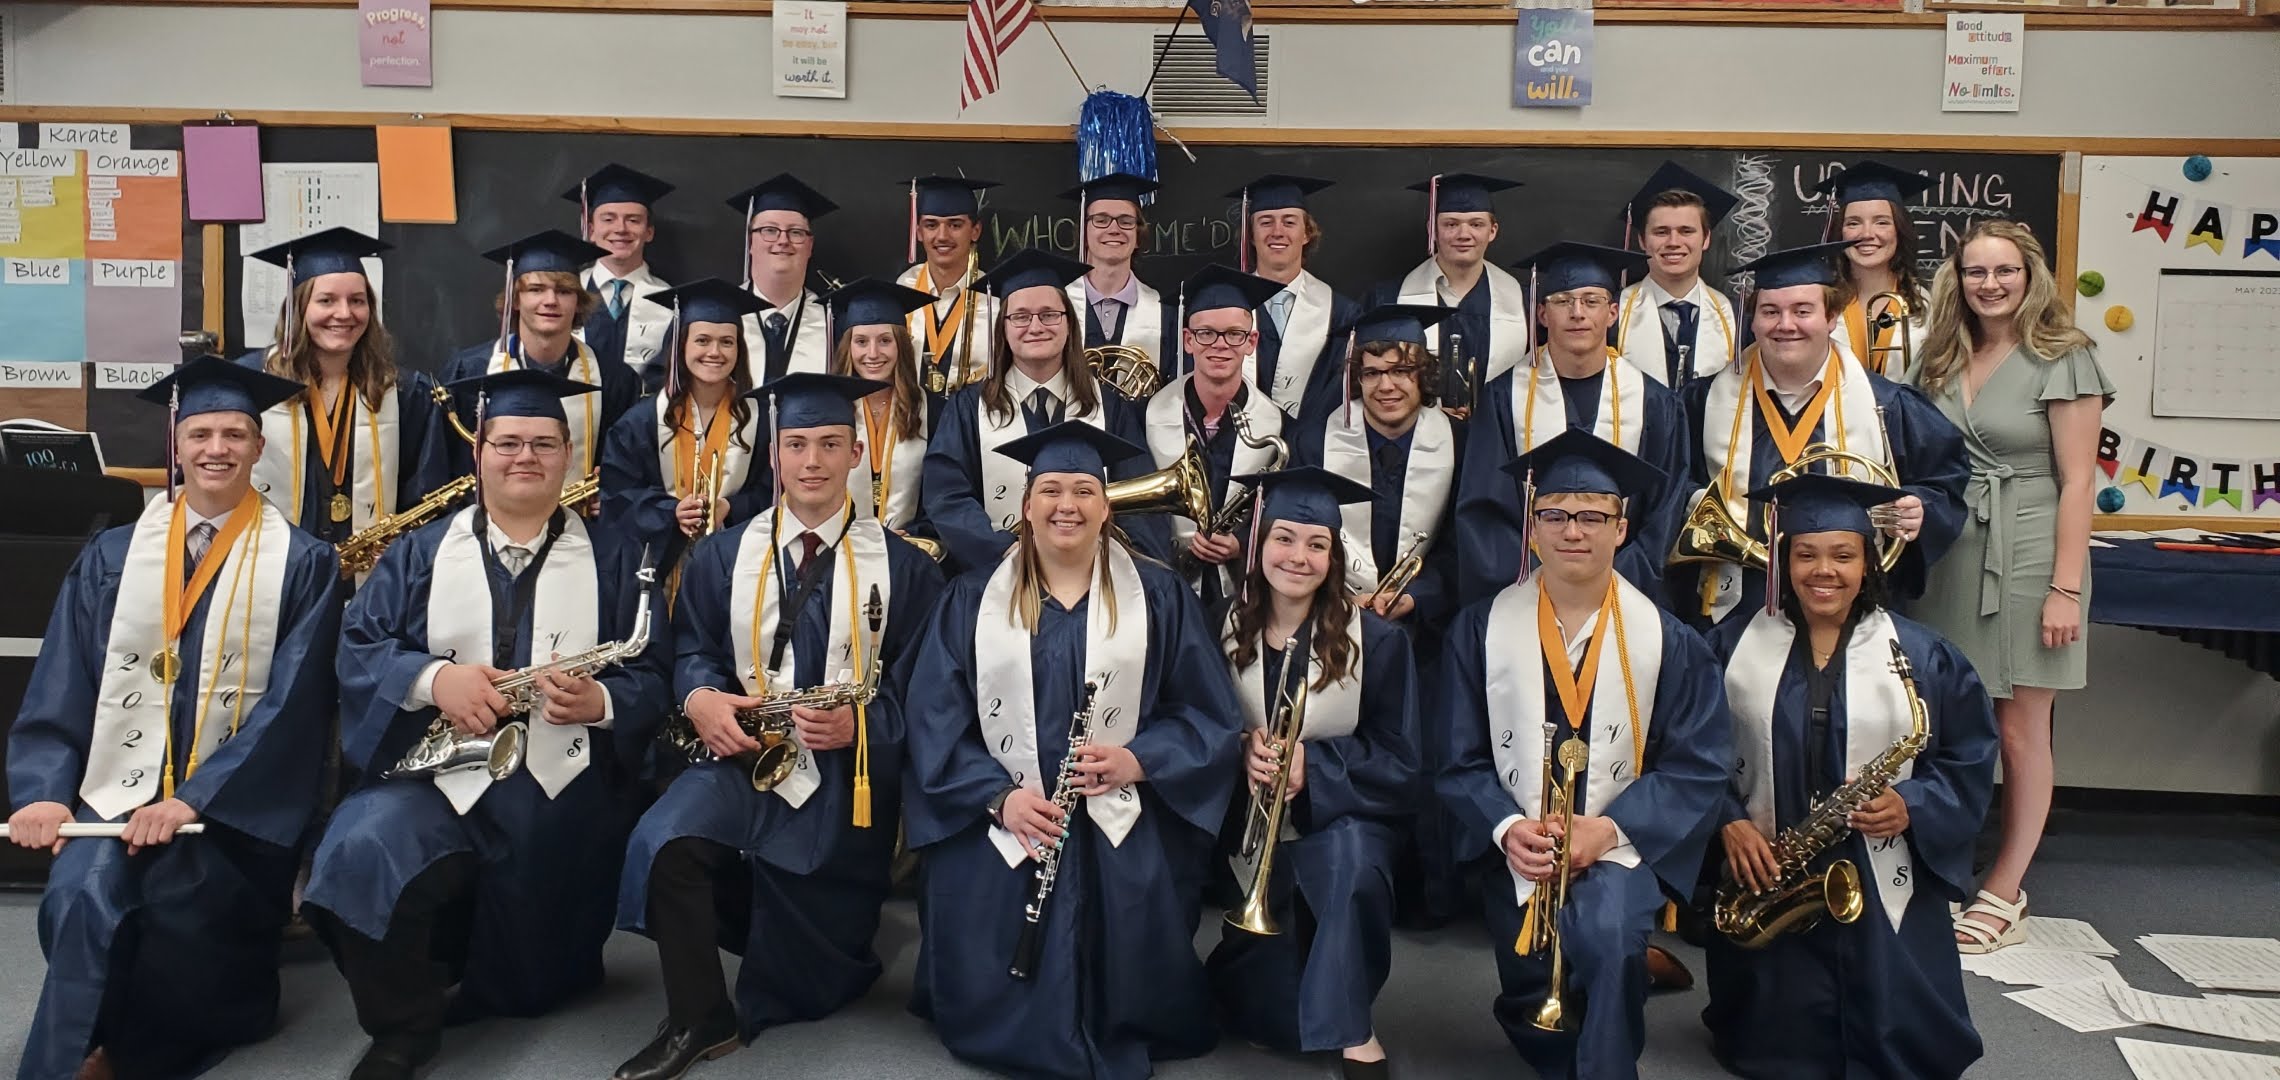 photo of students in graduation gown holding instruments